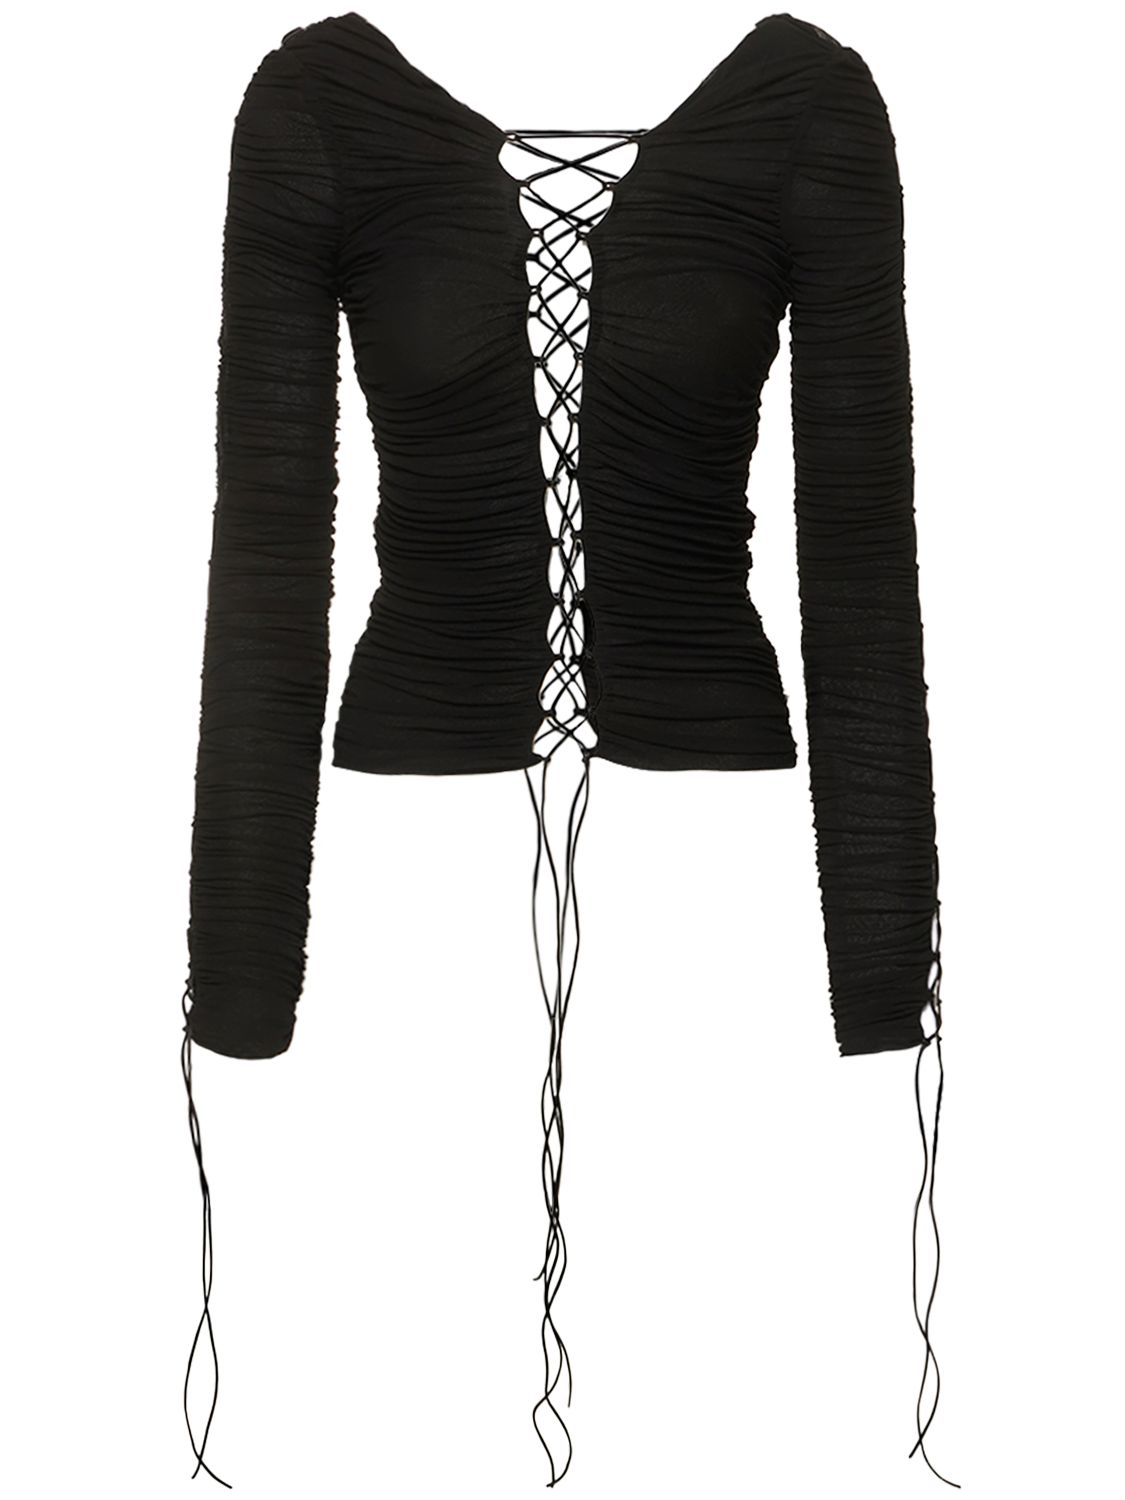 The Knit Viscose Top